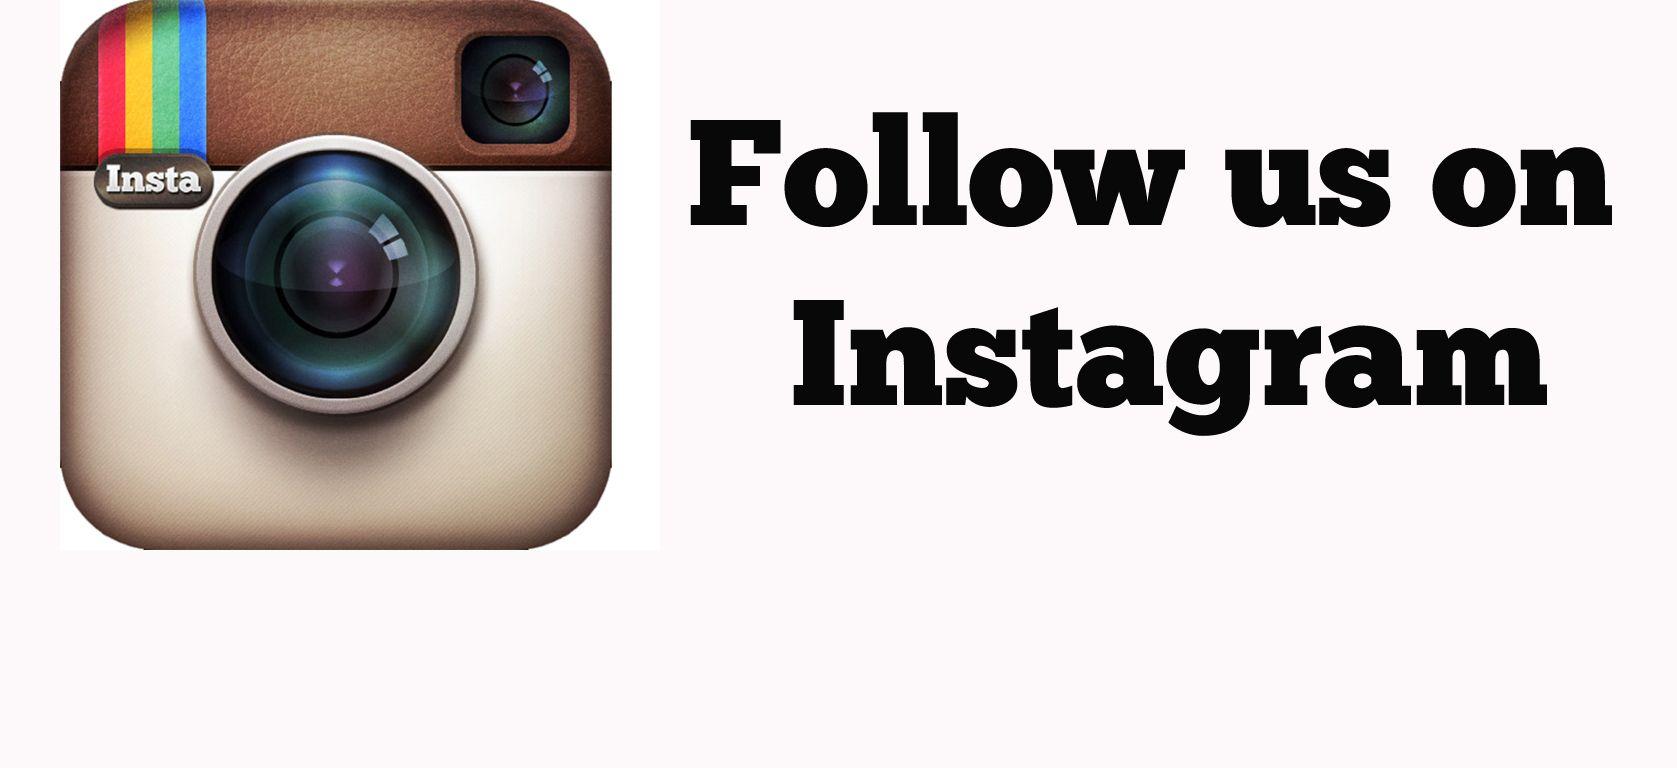 Like Us On Instagram Logo - Reasons Why Public Health Organizations Need To Be On Instagram